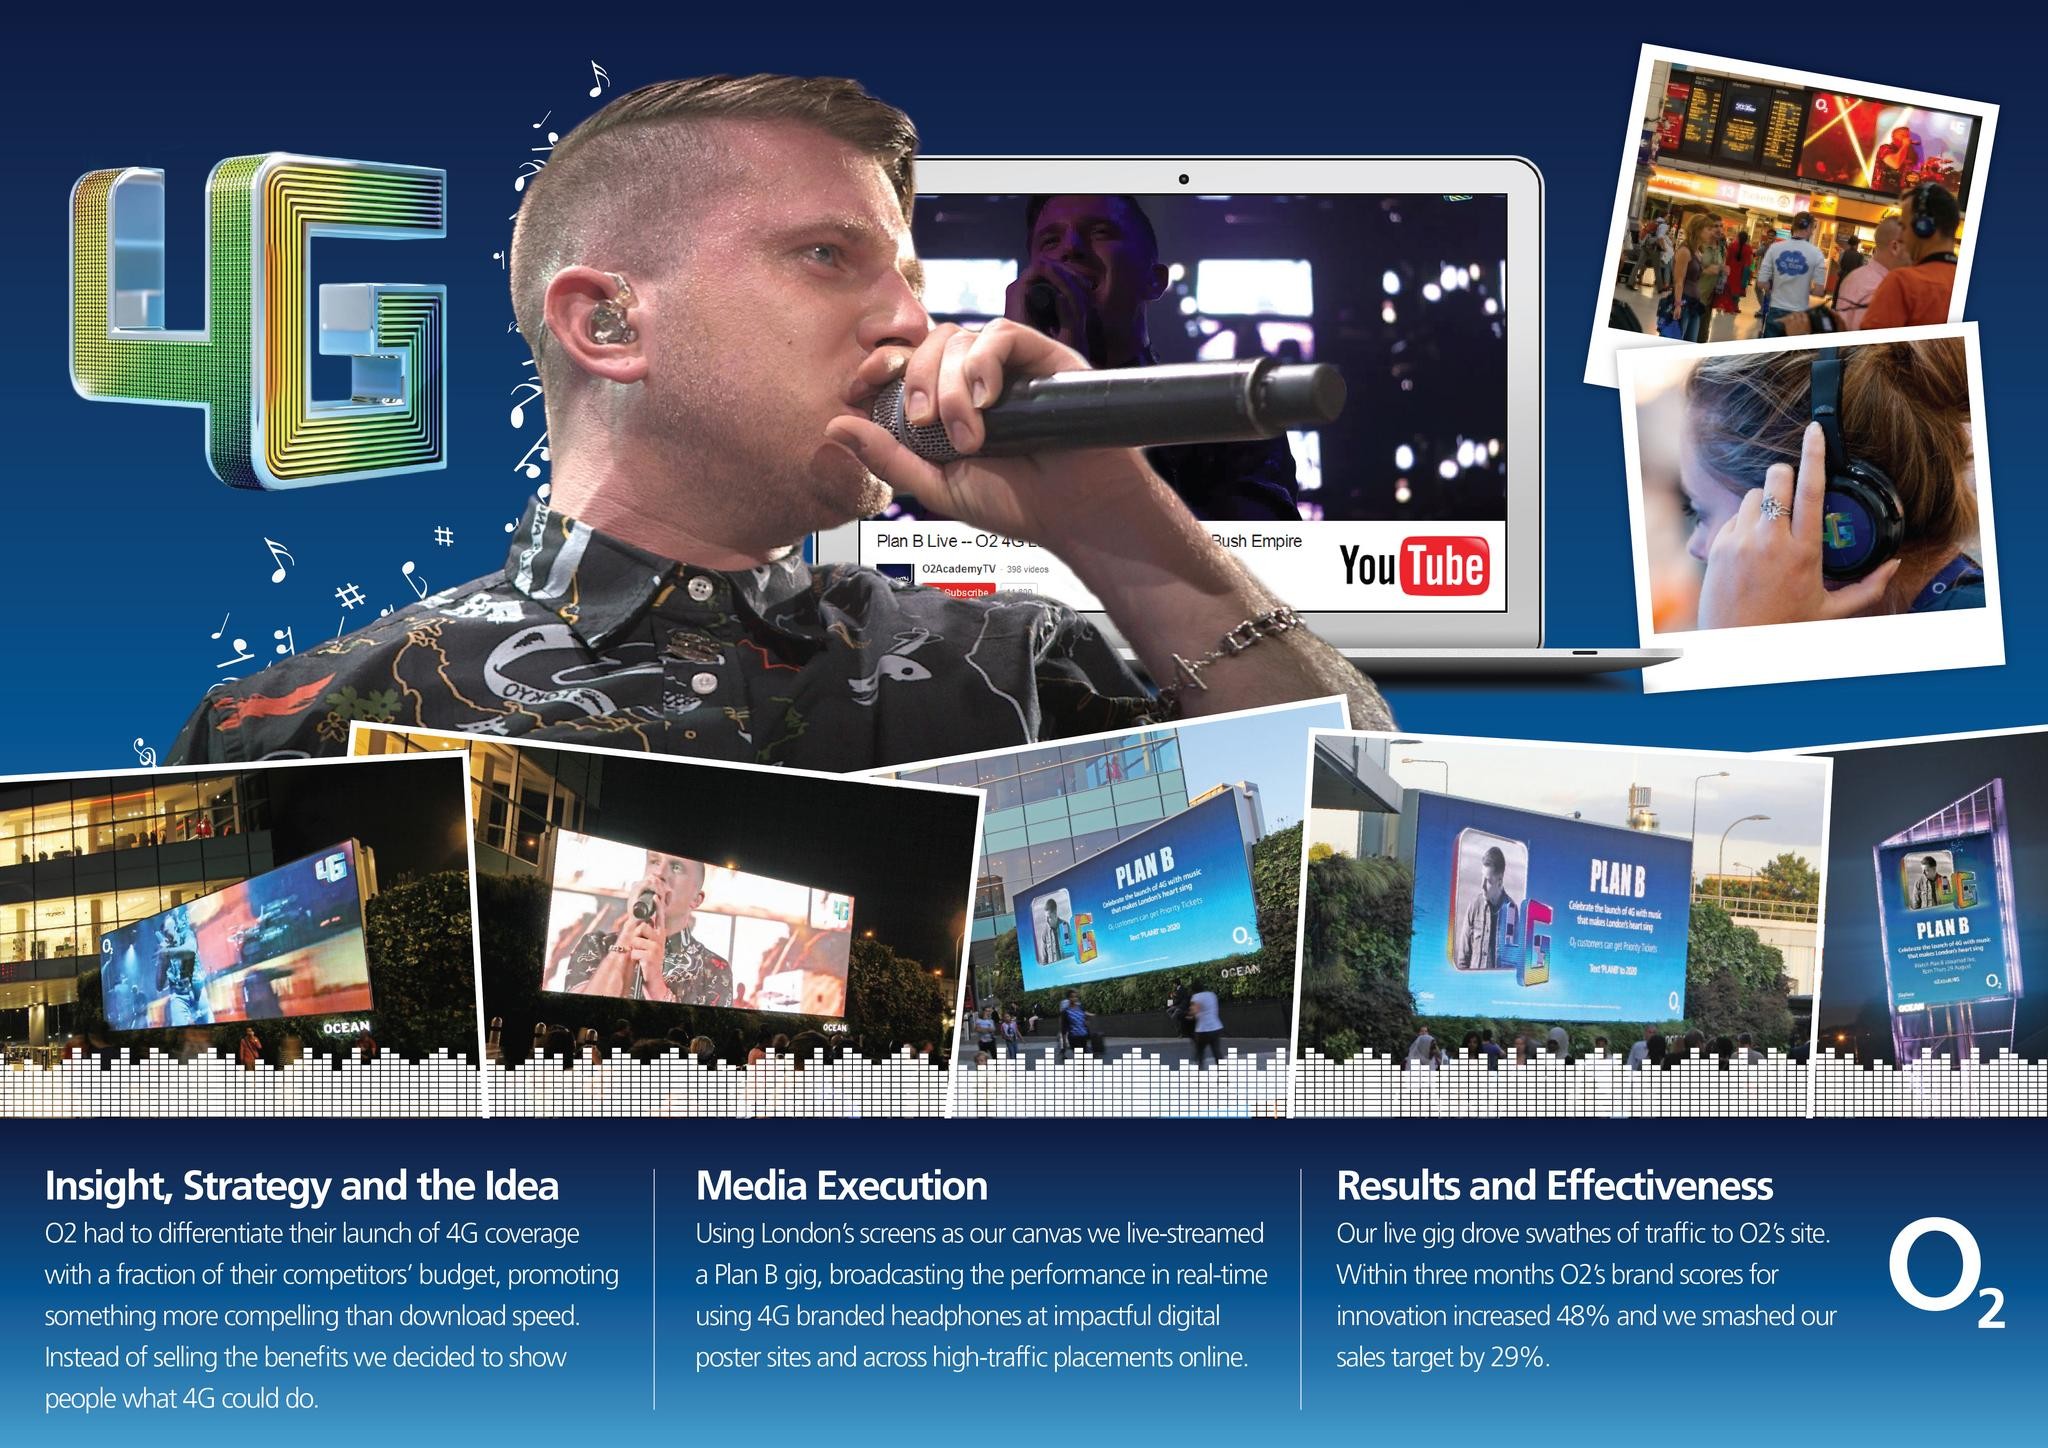 LAUNCHING 4G: ROCKING OUT LONDON WITH THE WORLD’S FIRST LIVE-STREAMED 4G GIG